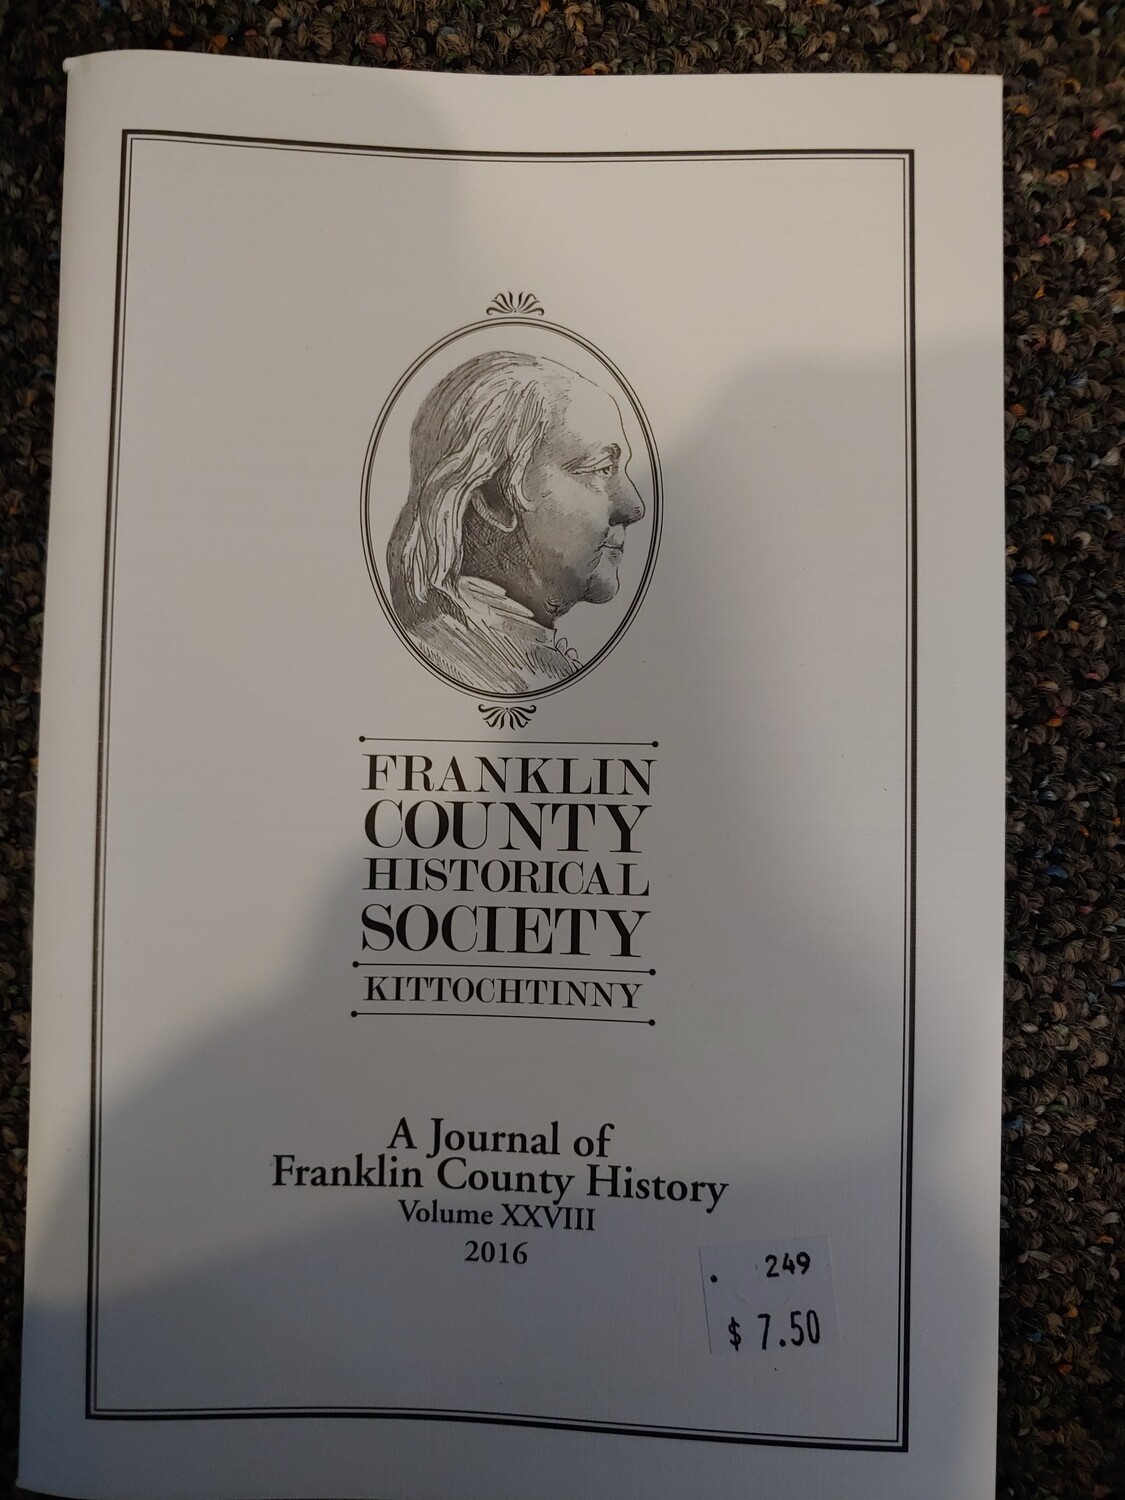 Franklin County Historical Society Journal 2016